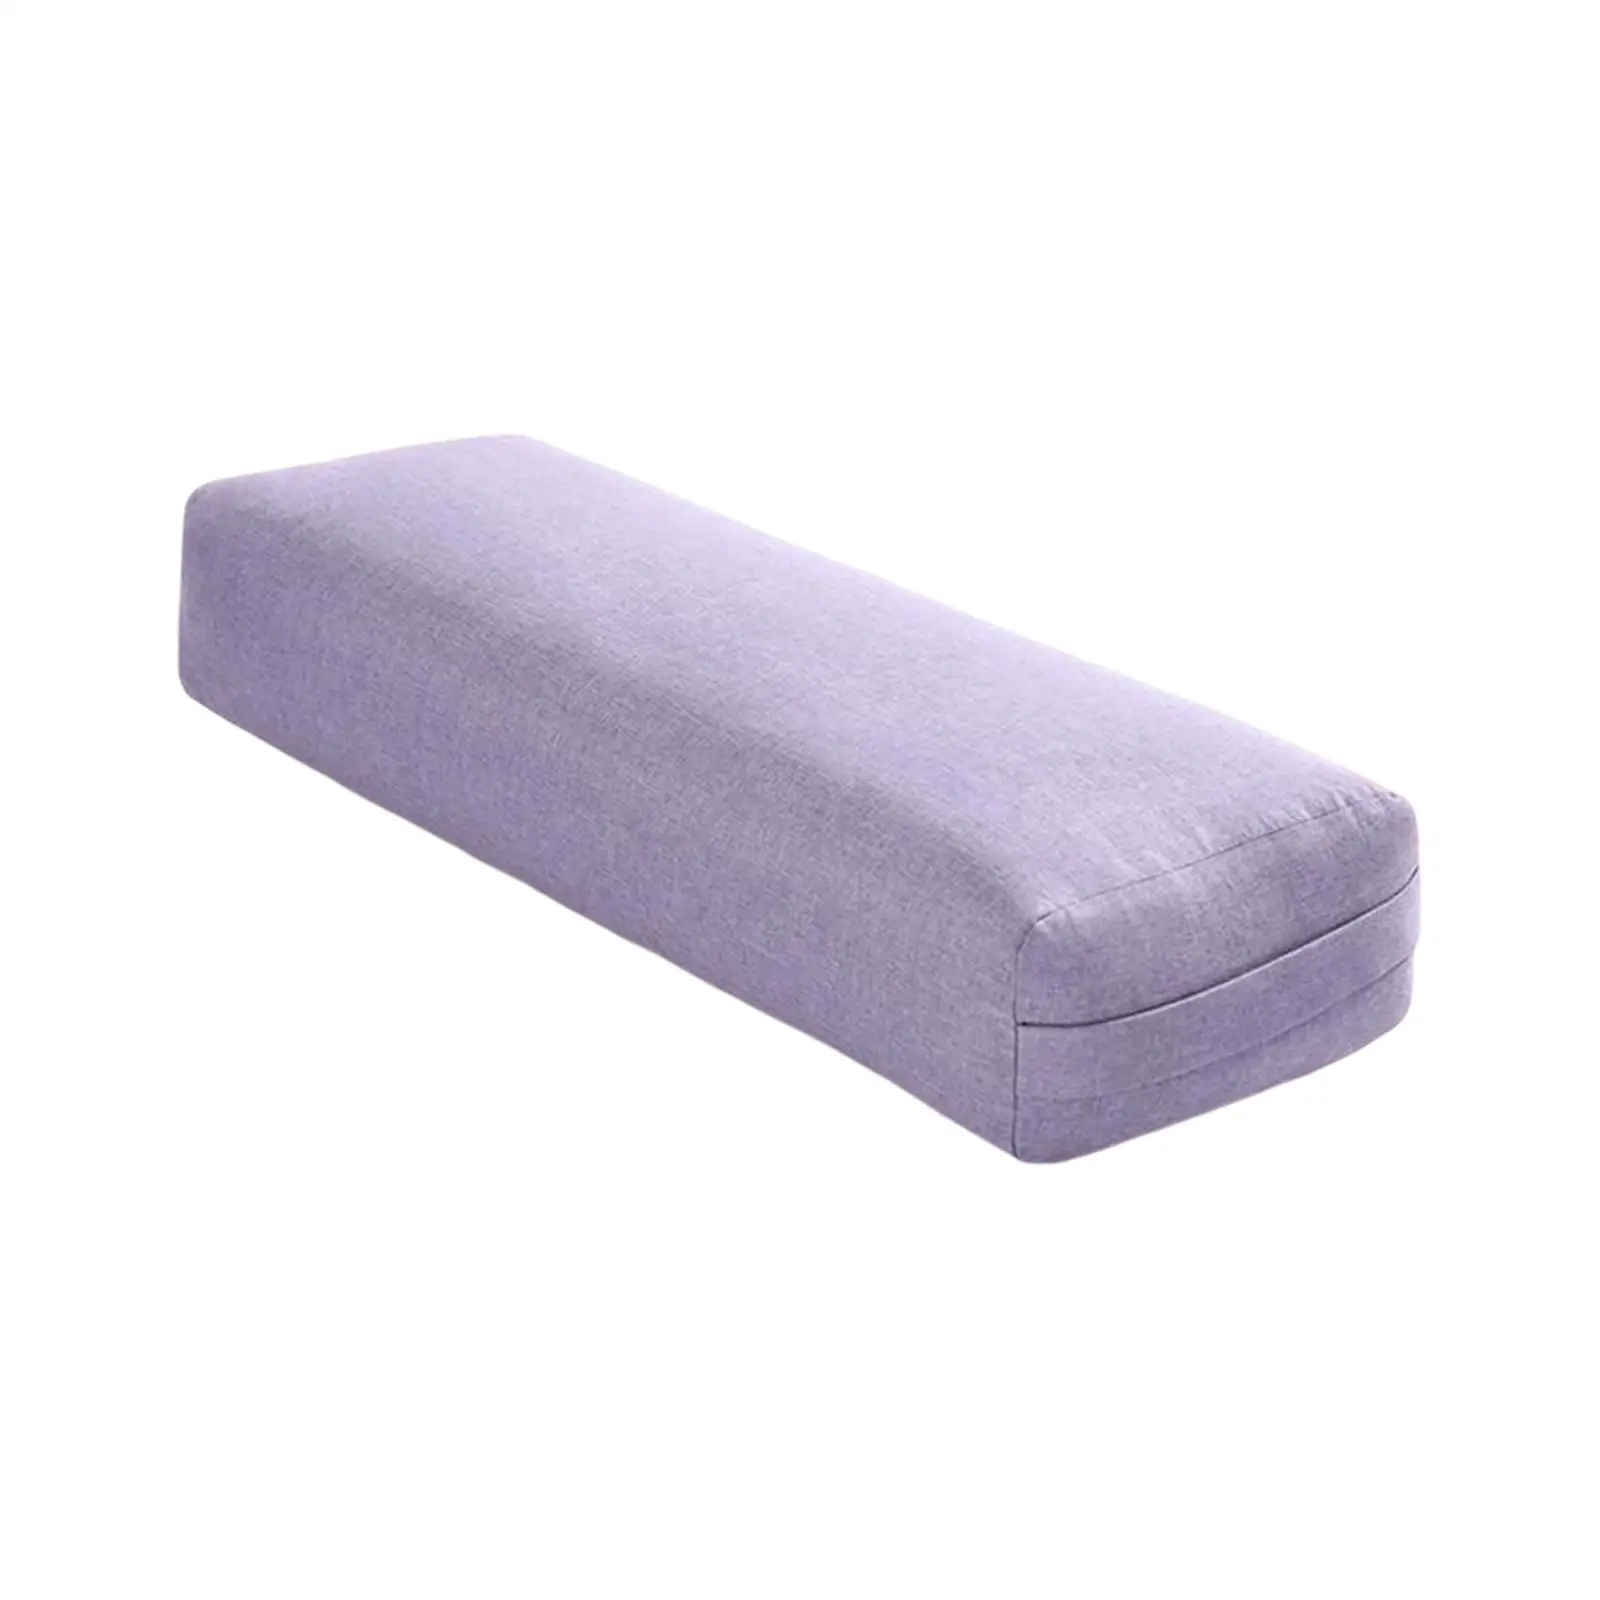 Professional Yoga Bolster with Carry Handle Pillow for Legs Restorative Yoga